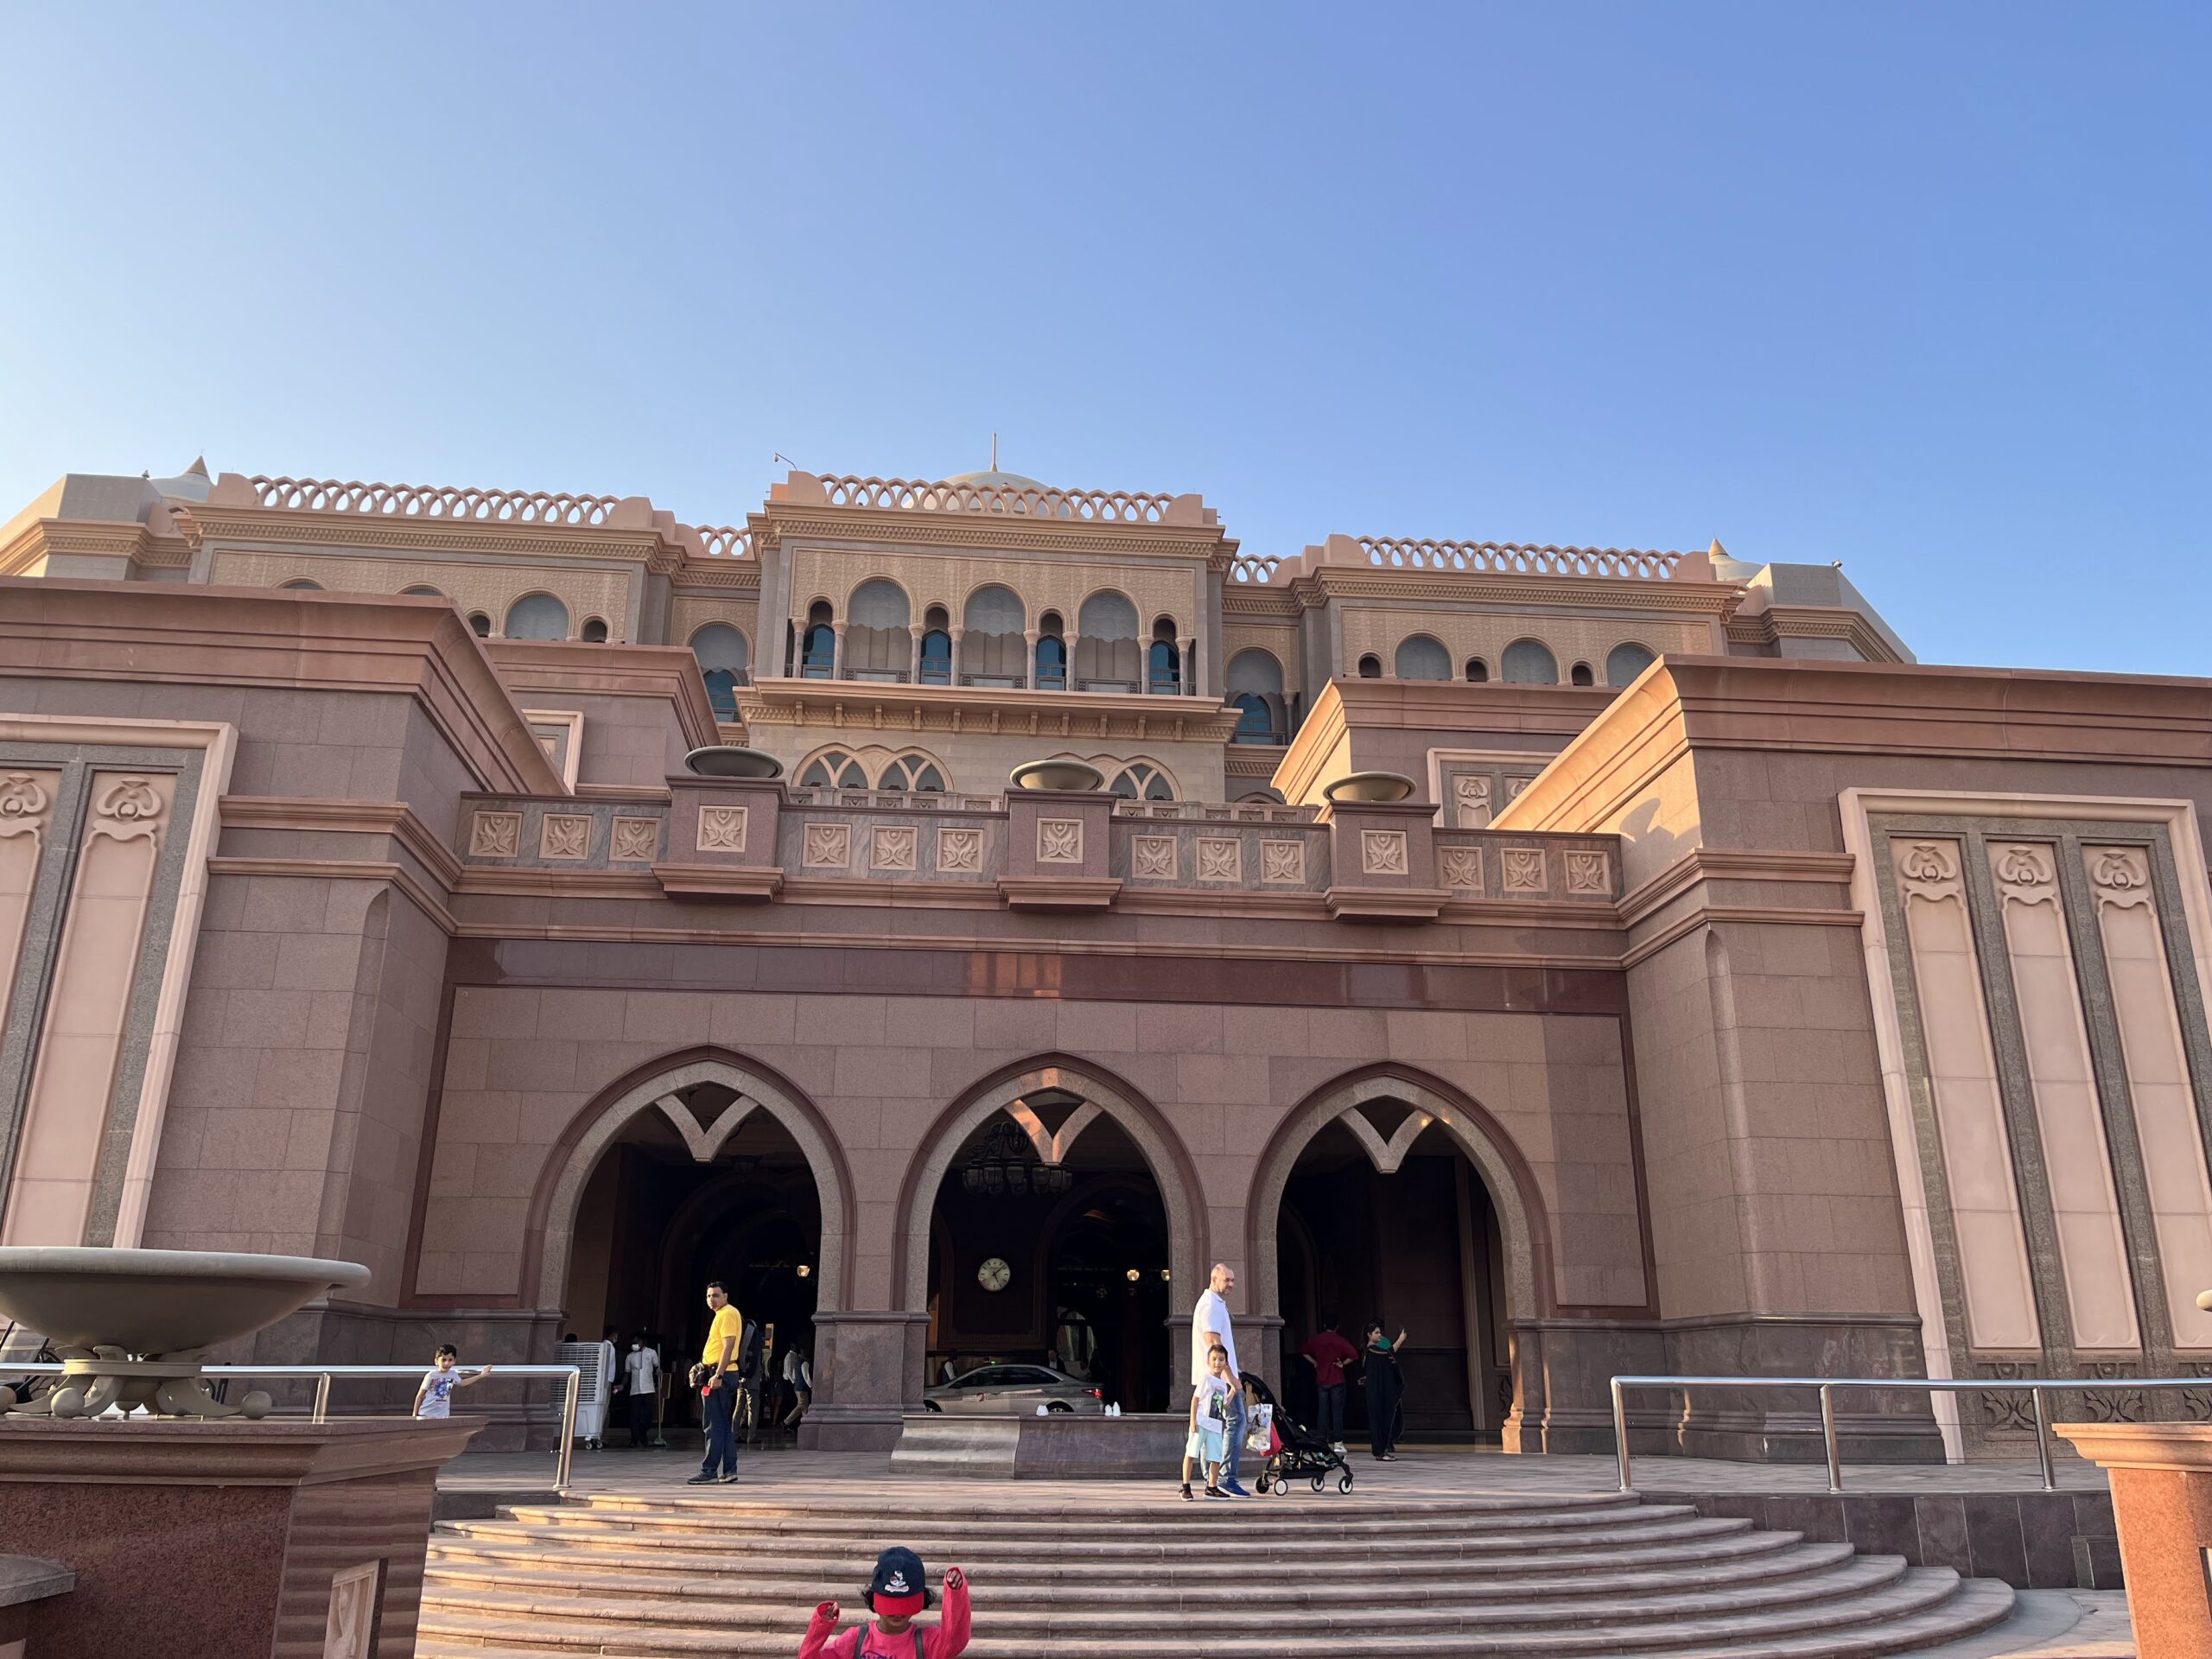 The Emirates Palace Hotel in Abu Dhabi - most luxurious hotel 